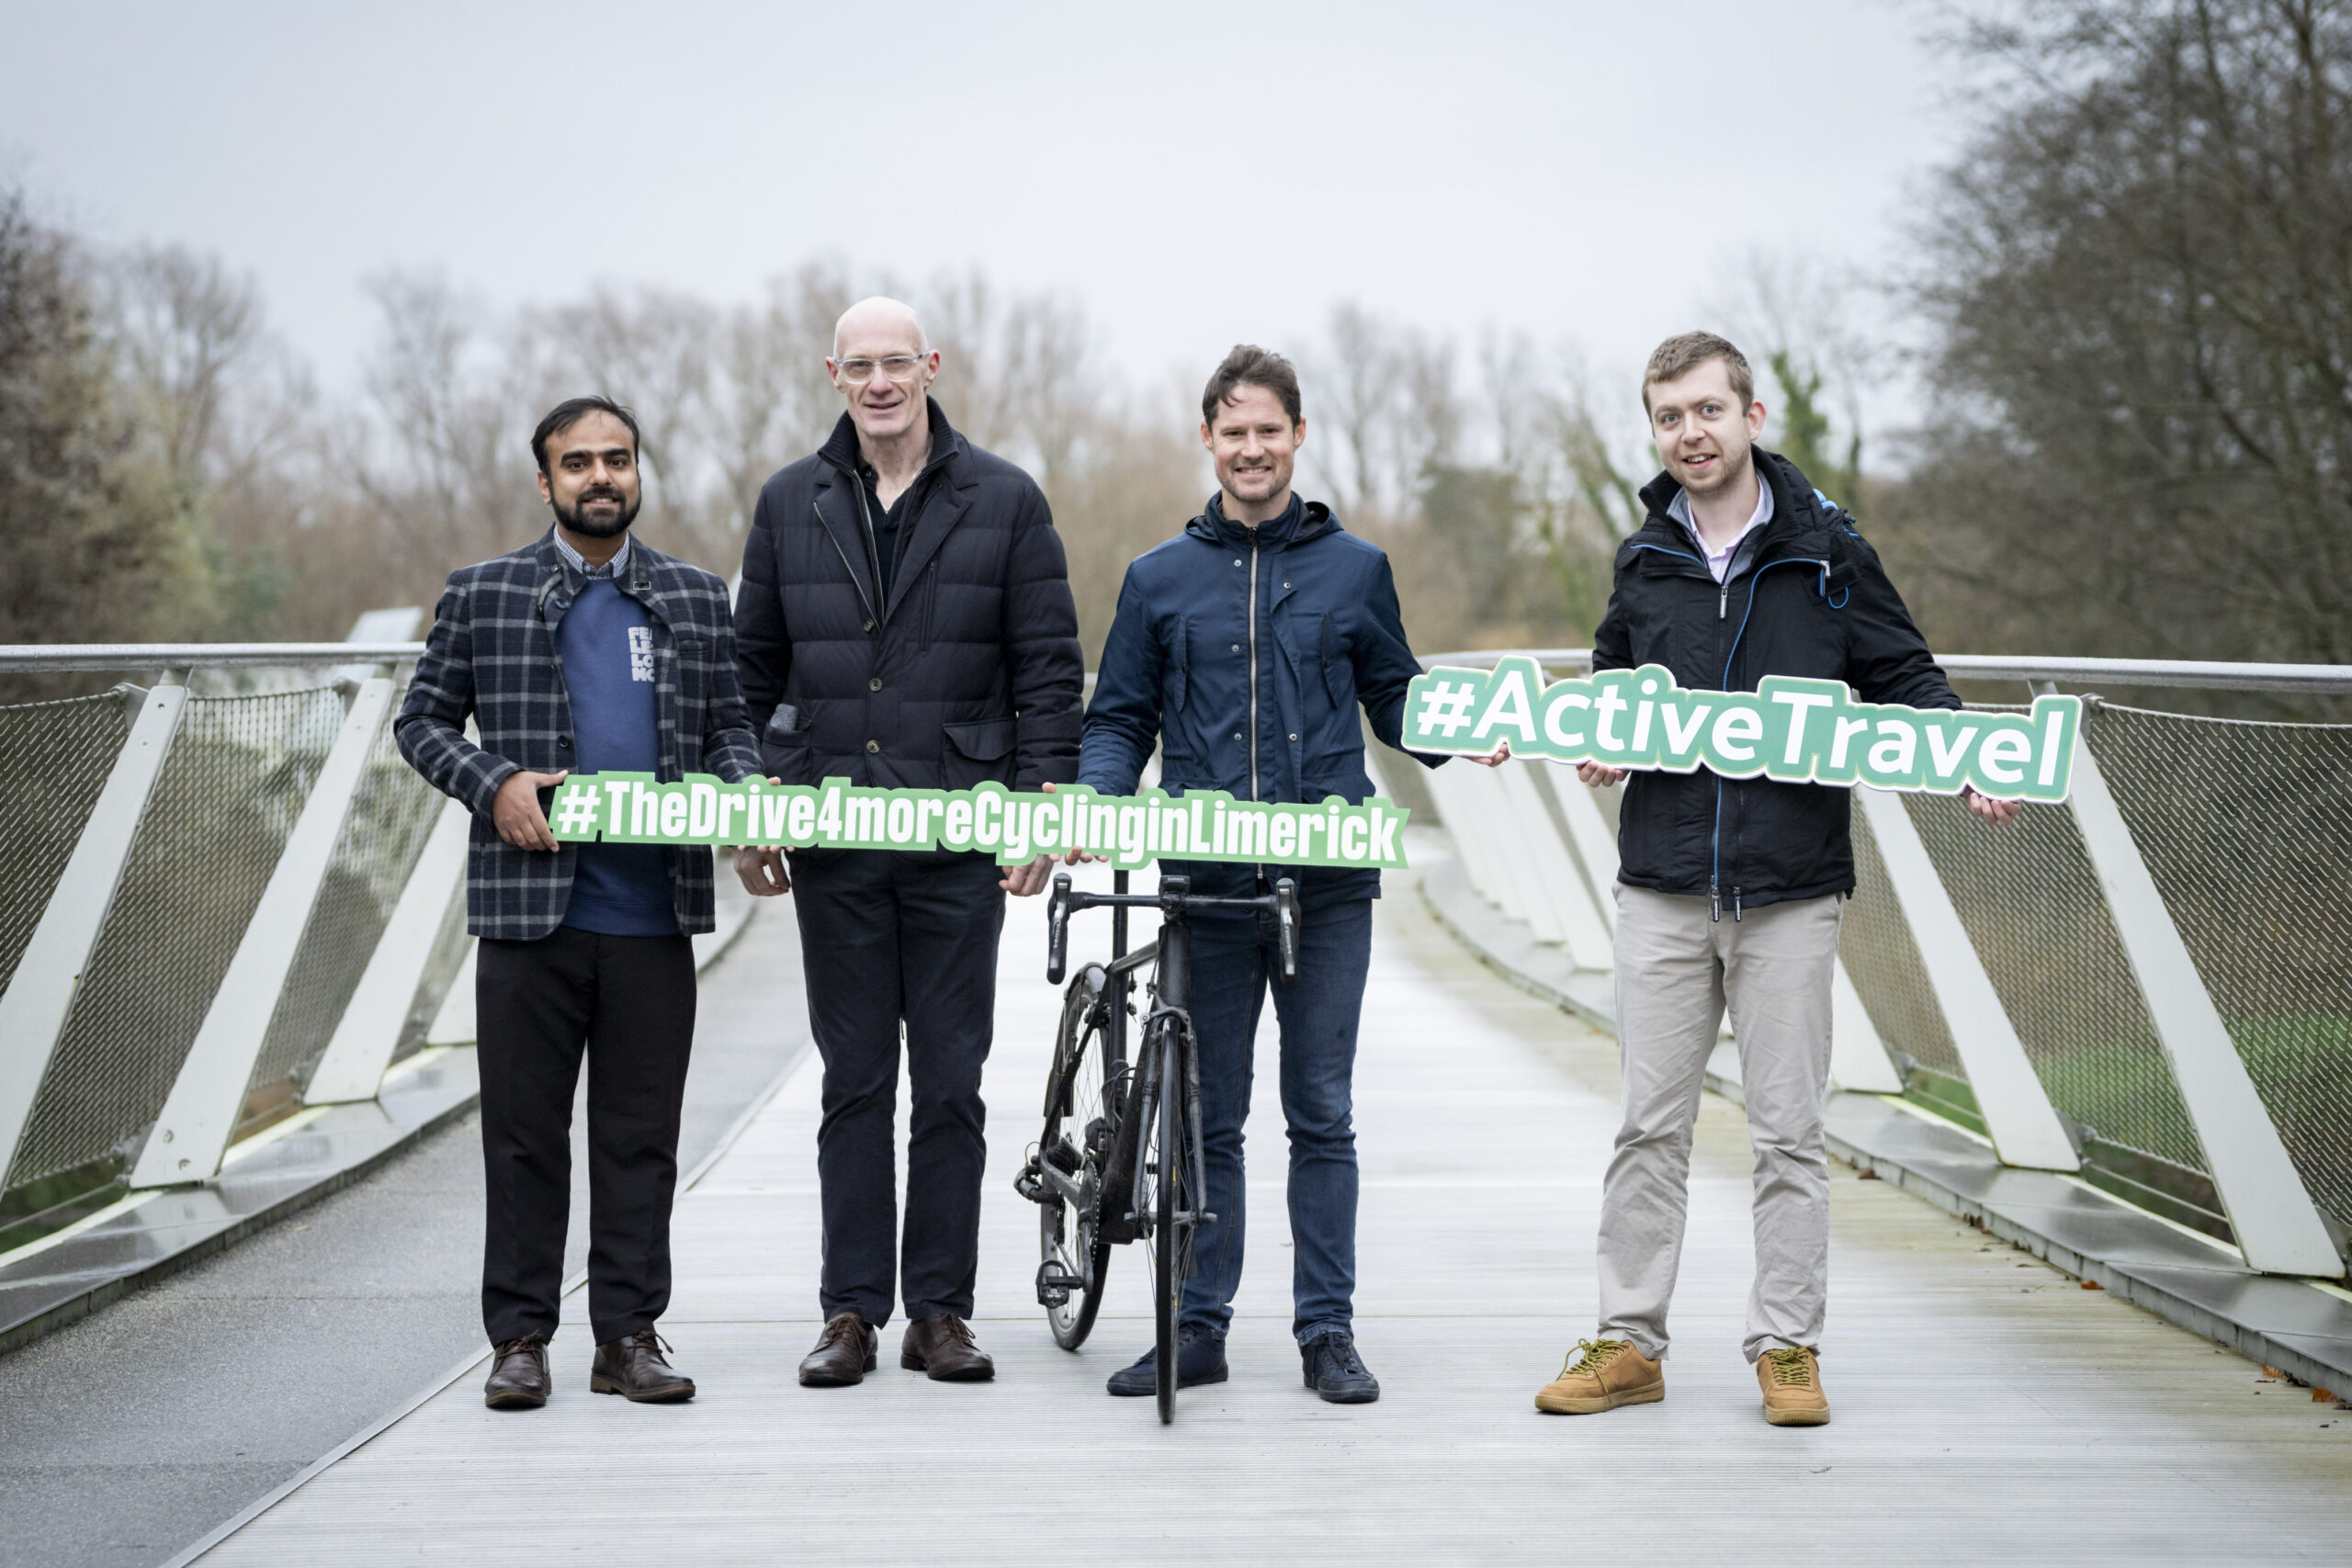 Limerick Active Travel team project The Drive for More Cycling in Limerick